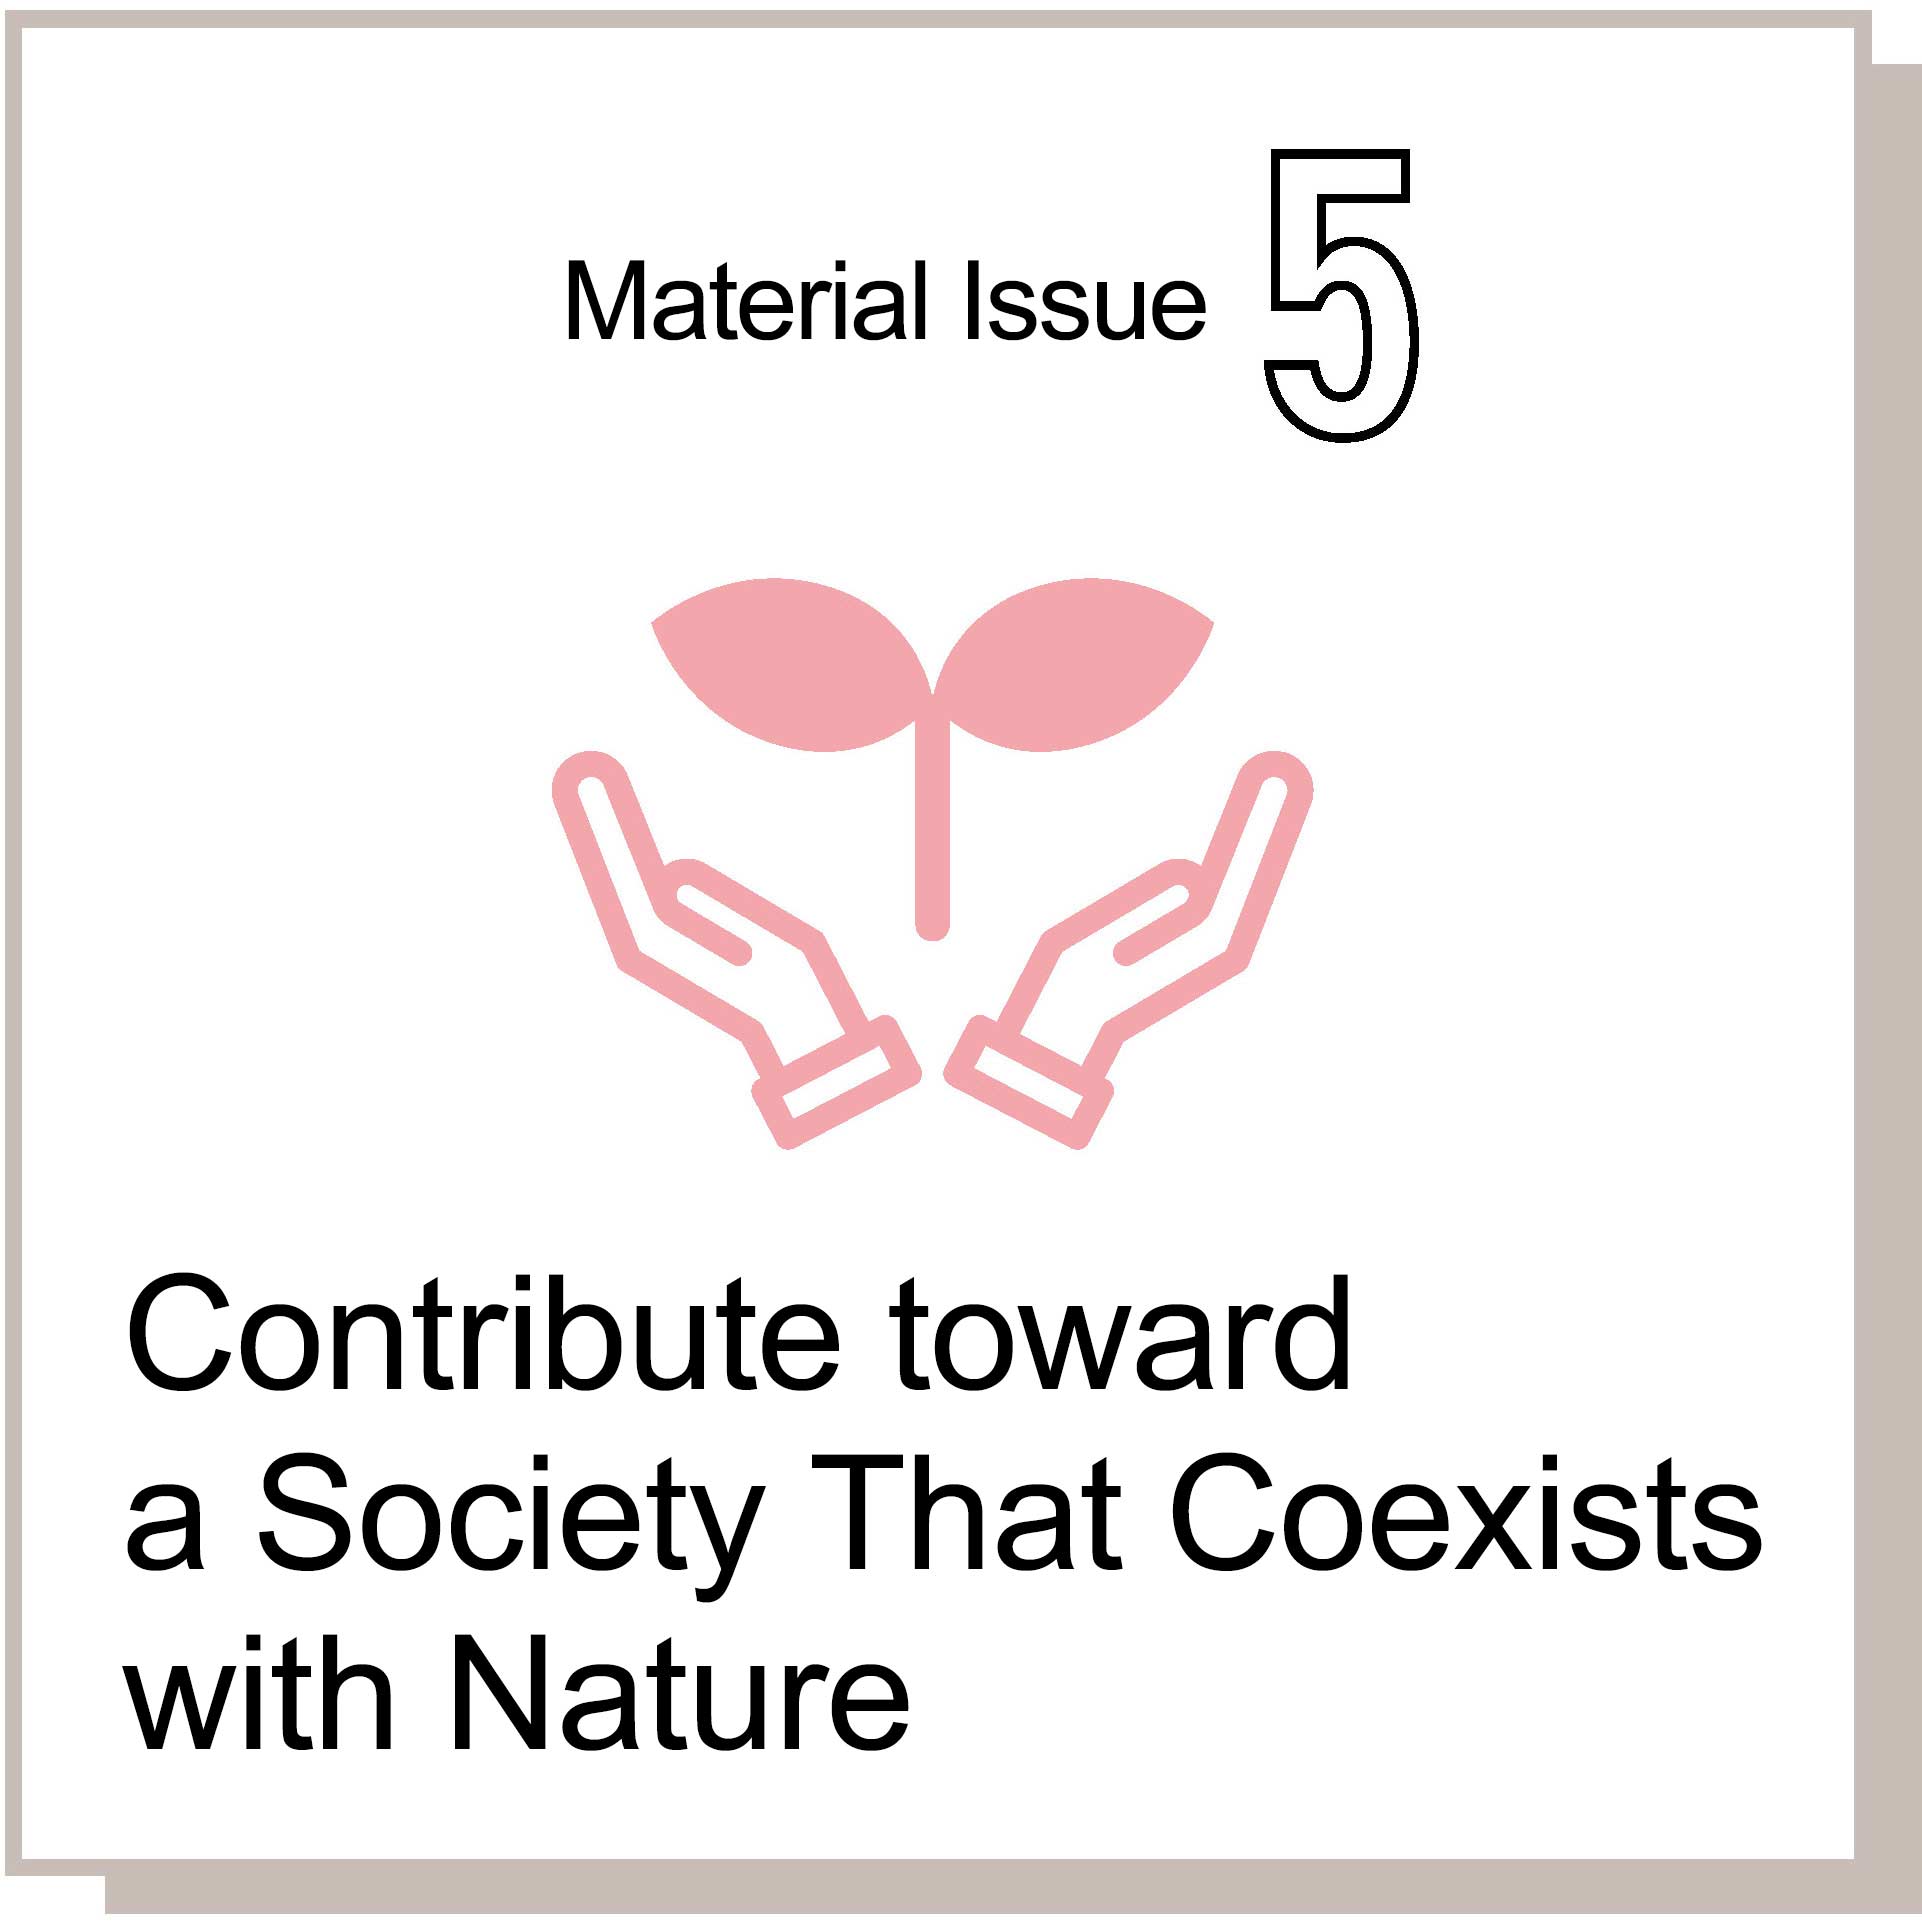 Material Issue 5 Contribute toward a Society That Coexists with Nature